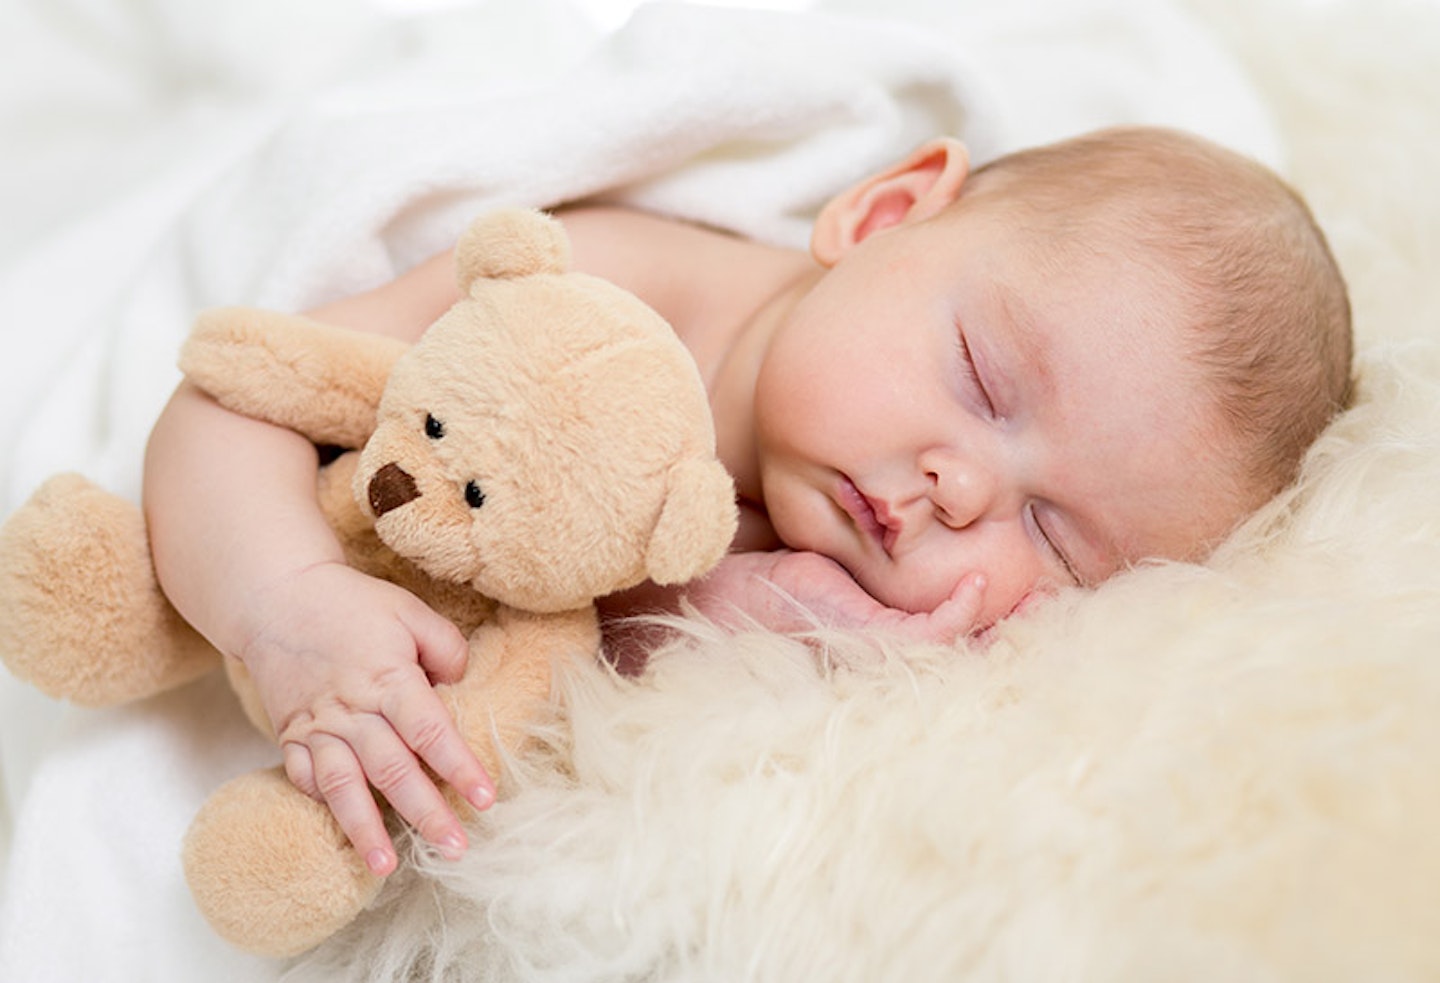 Ensure your baby has a proper bedtime routine